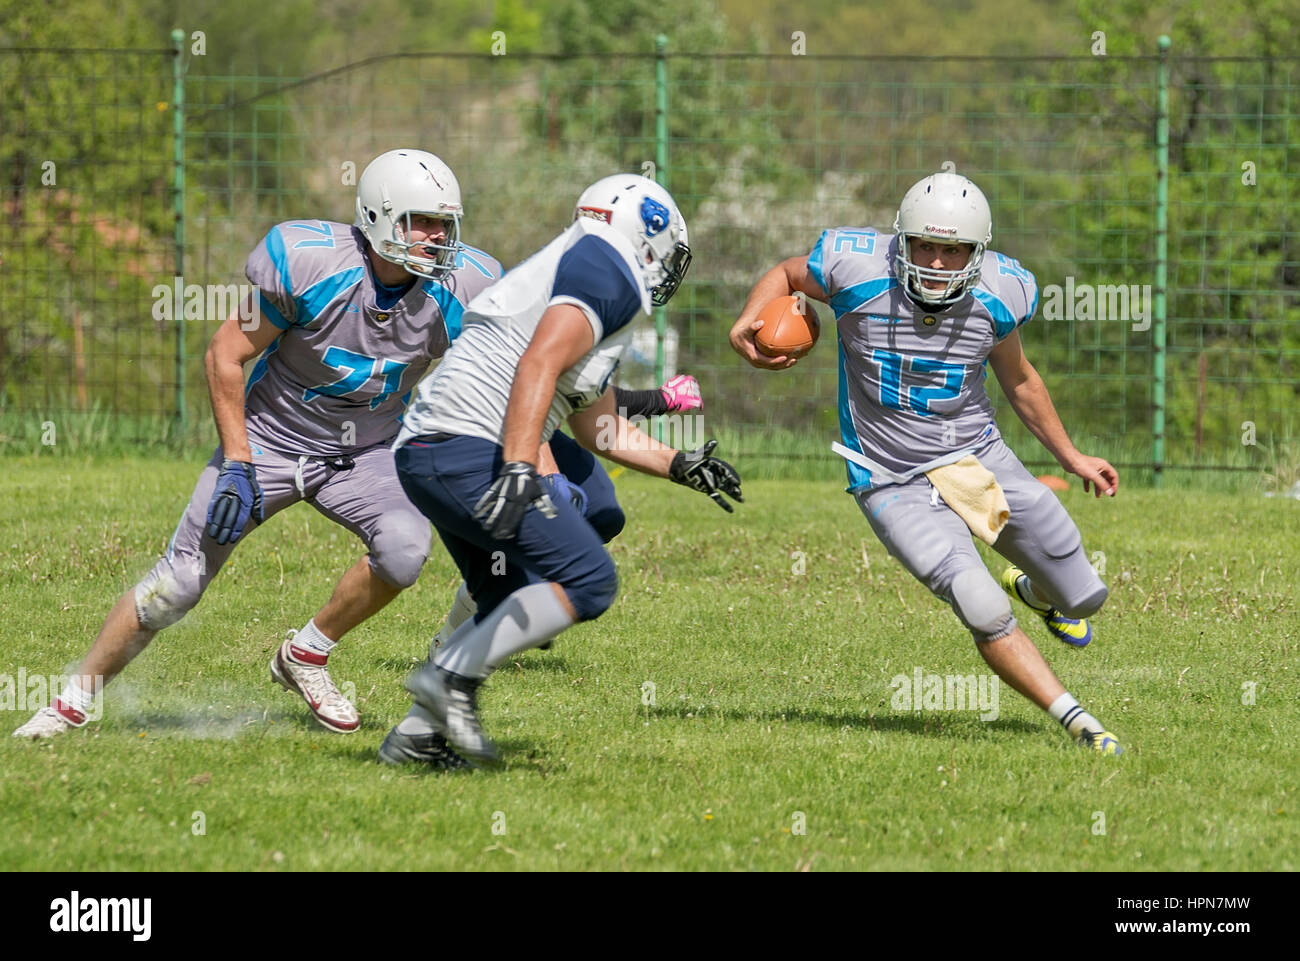 American football practice match on a sunny day Stock Photo